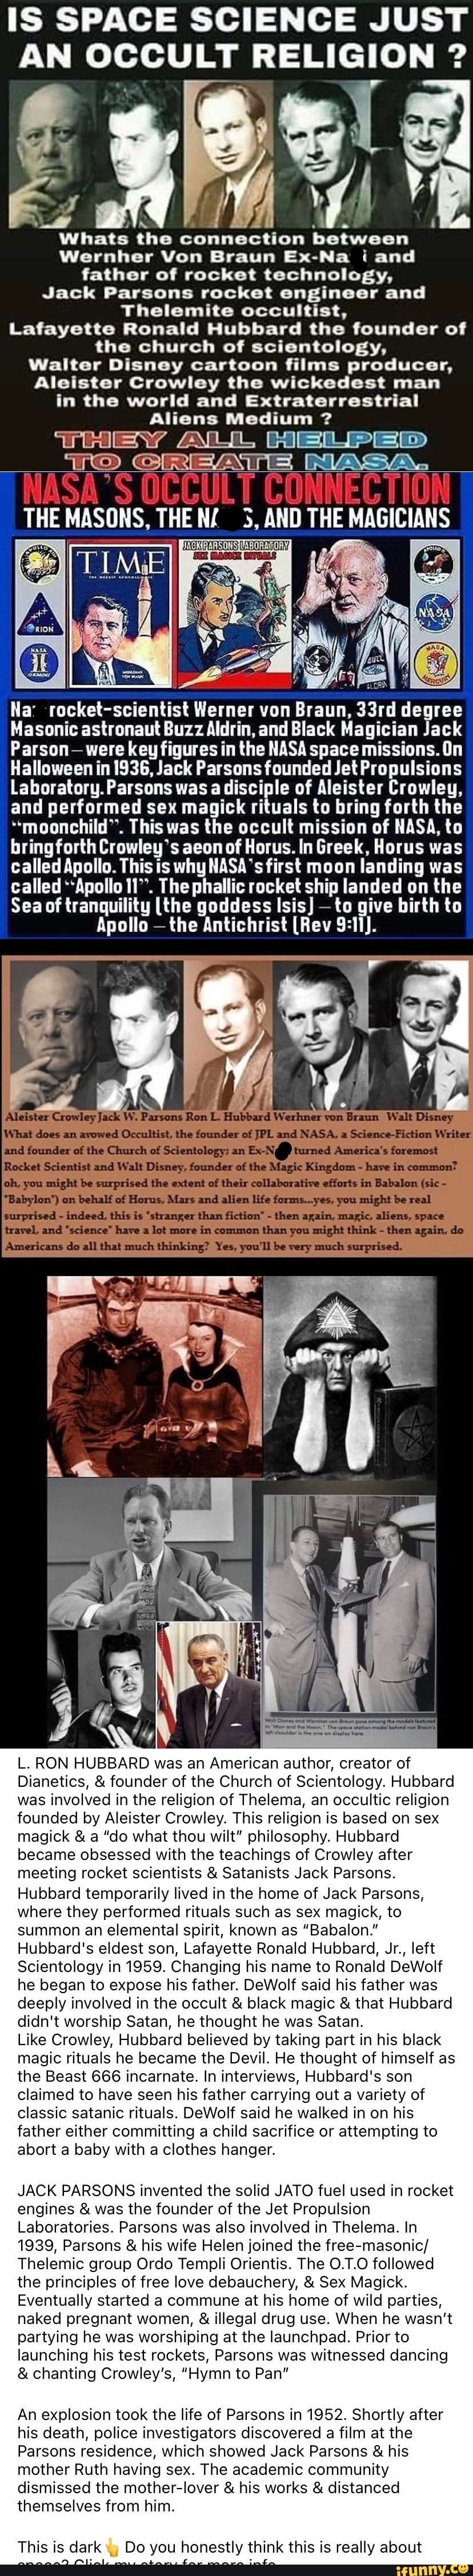 nasa and the occult